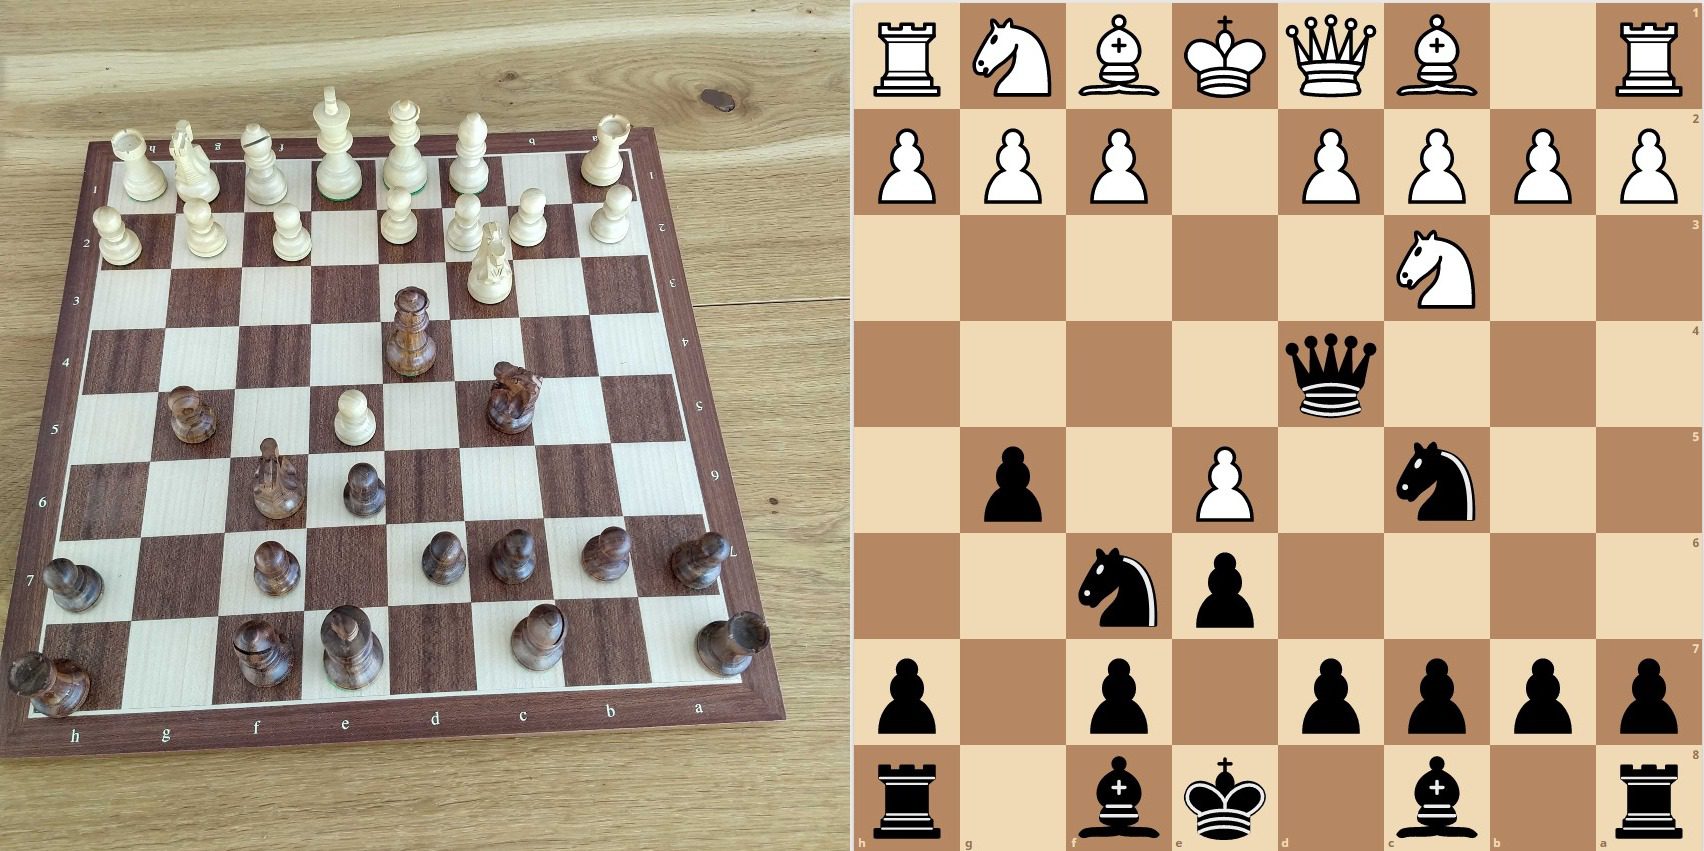 chess24 - How did Jan finish things off? White to play 